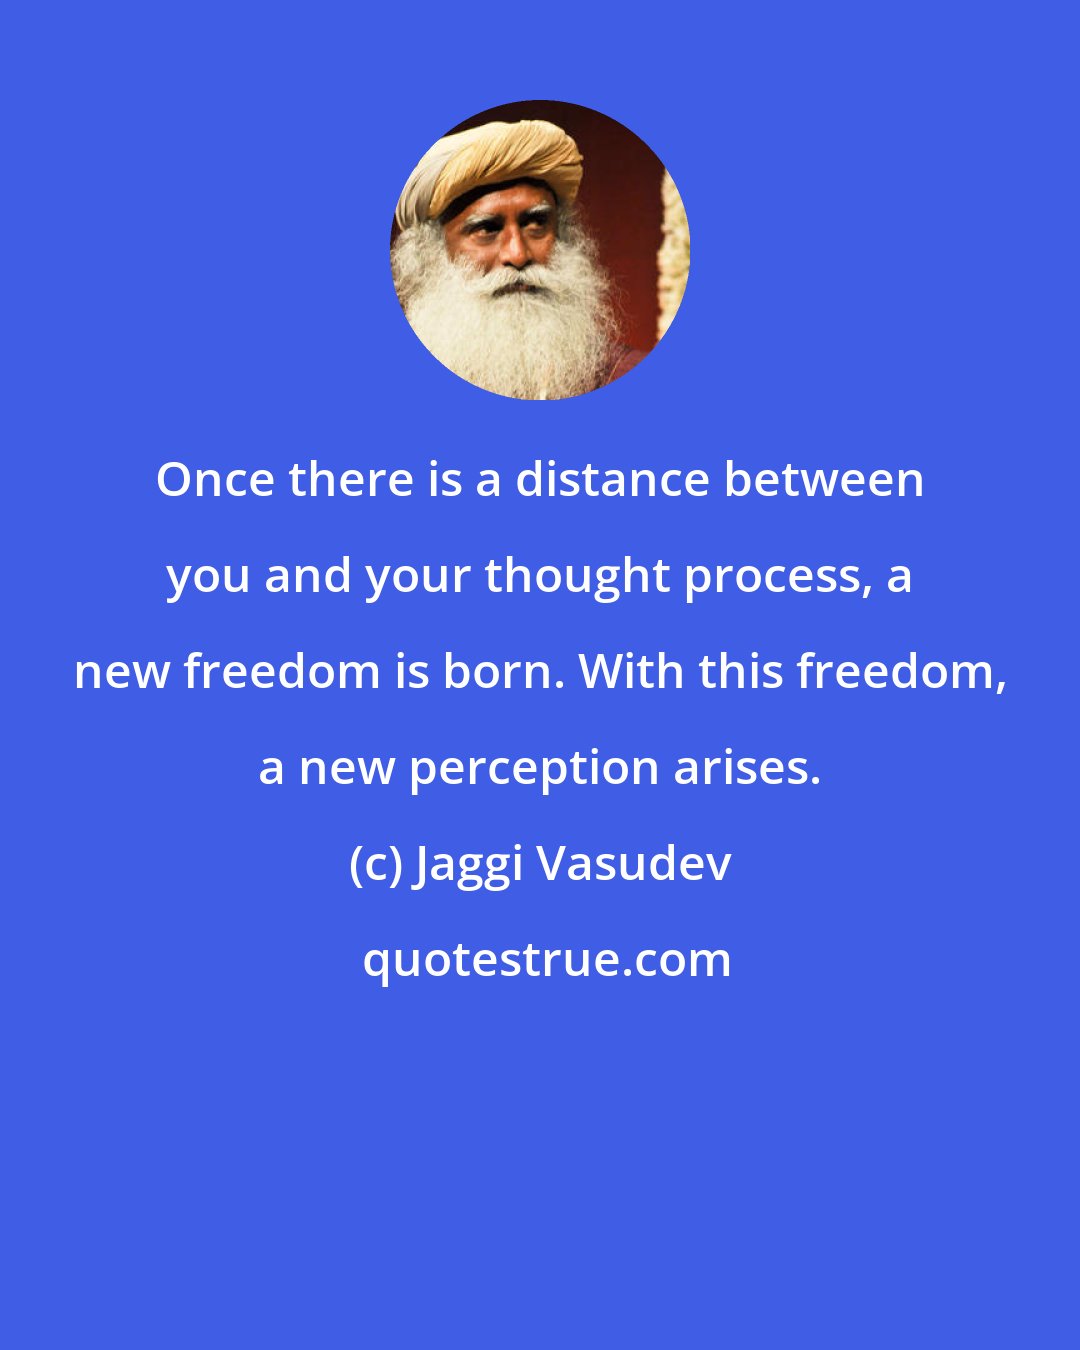 Jaggi Vasudev: Once there is a distance between you and your thought process, a new freedom is born. With this freedom, a new perception arises.